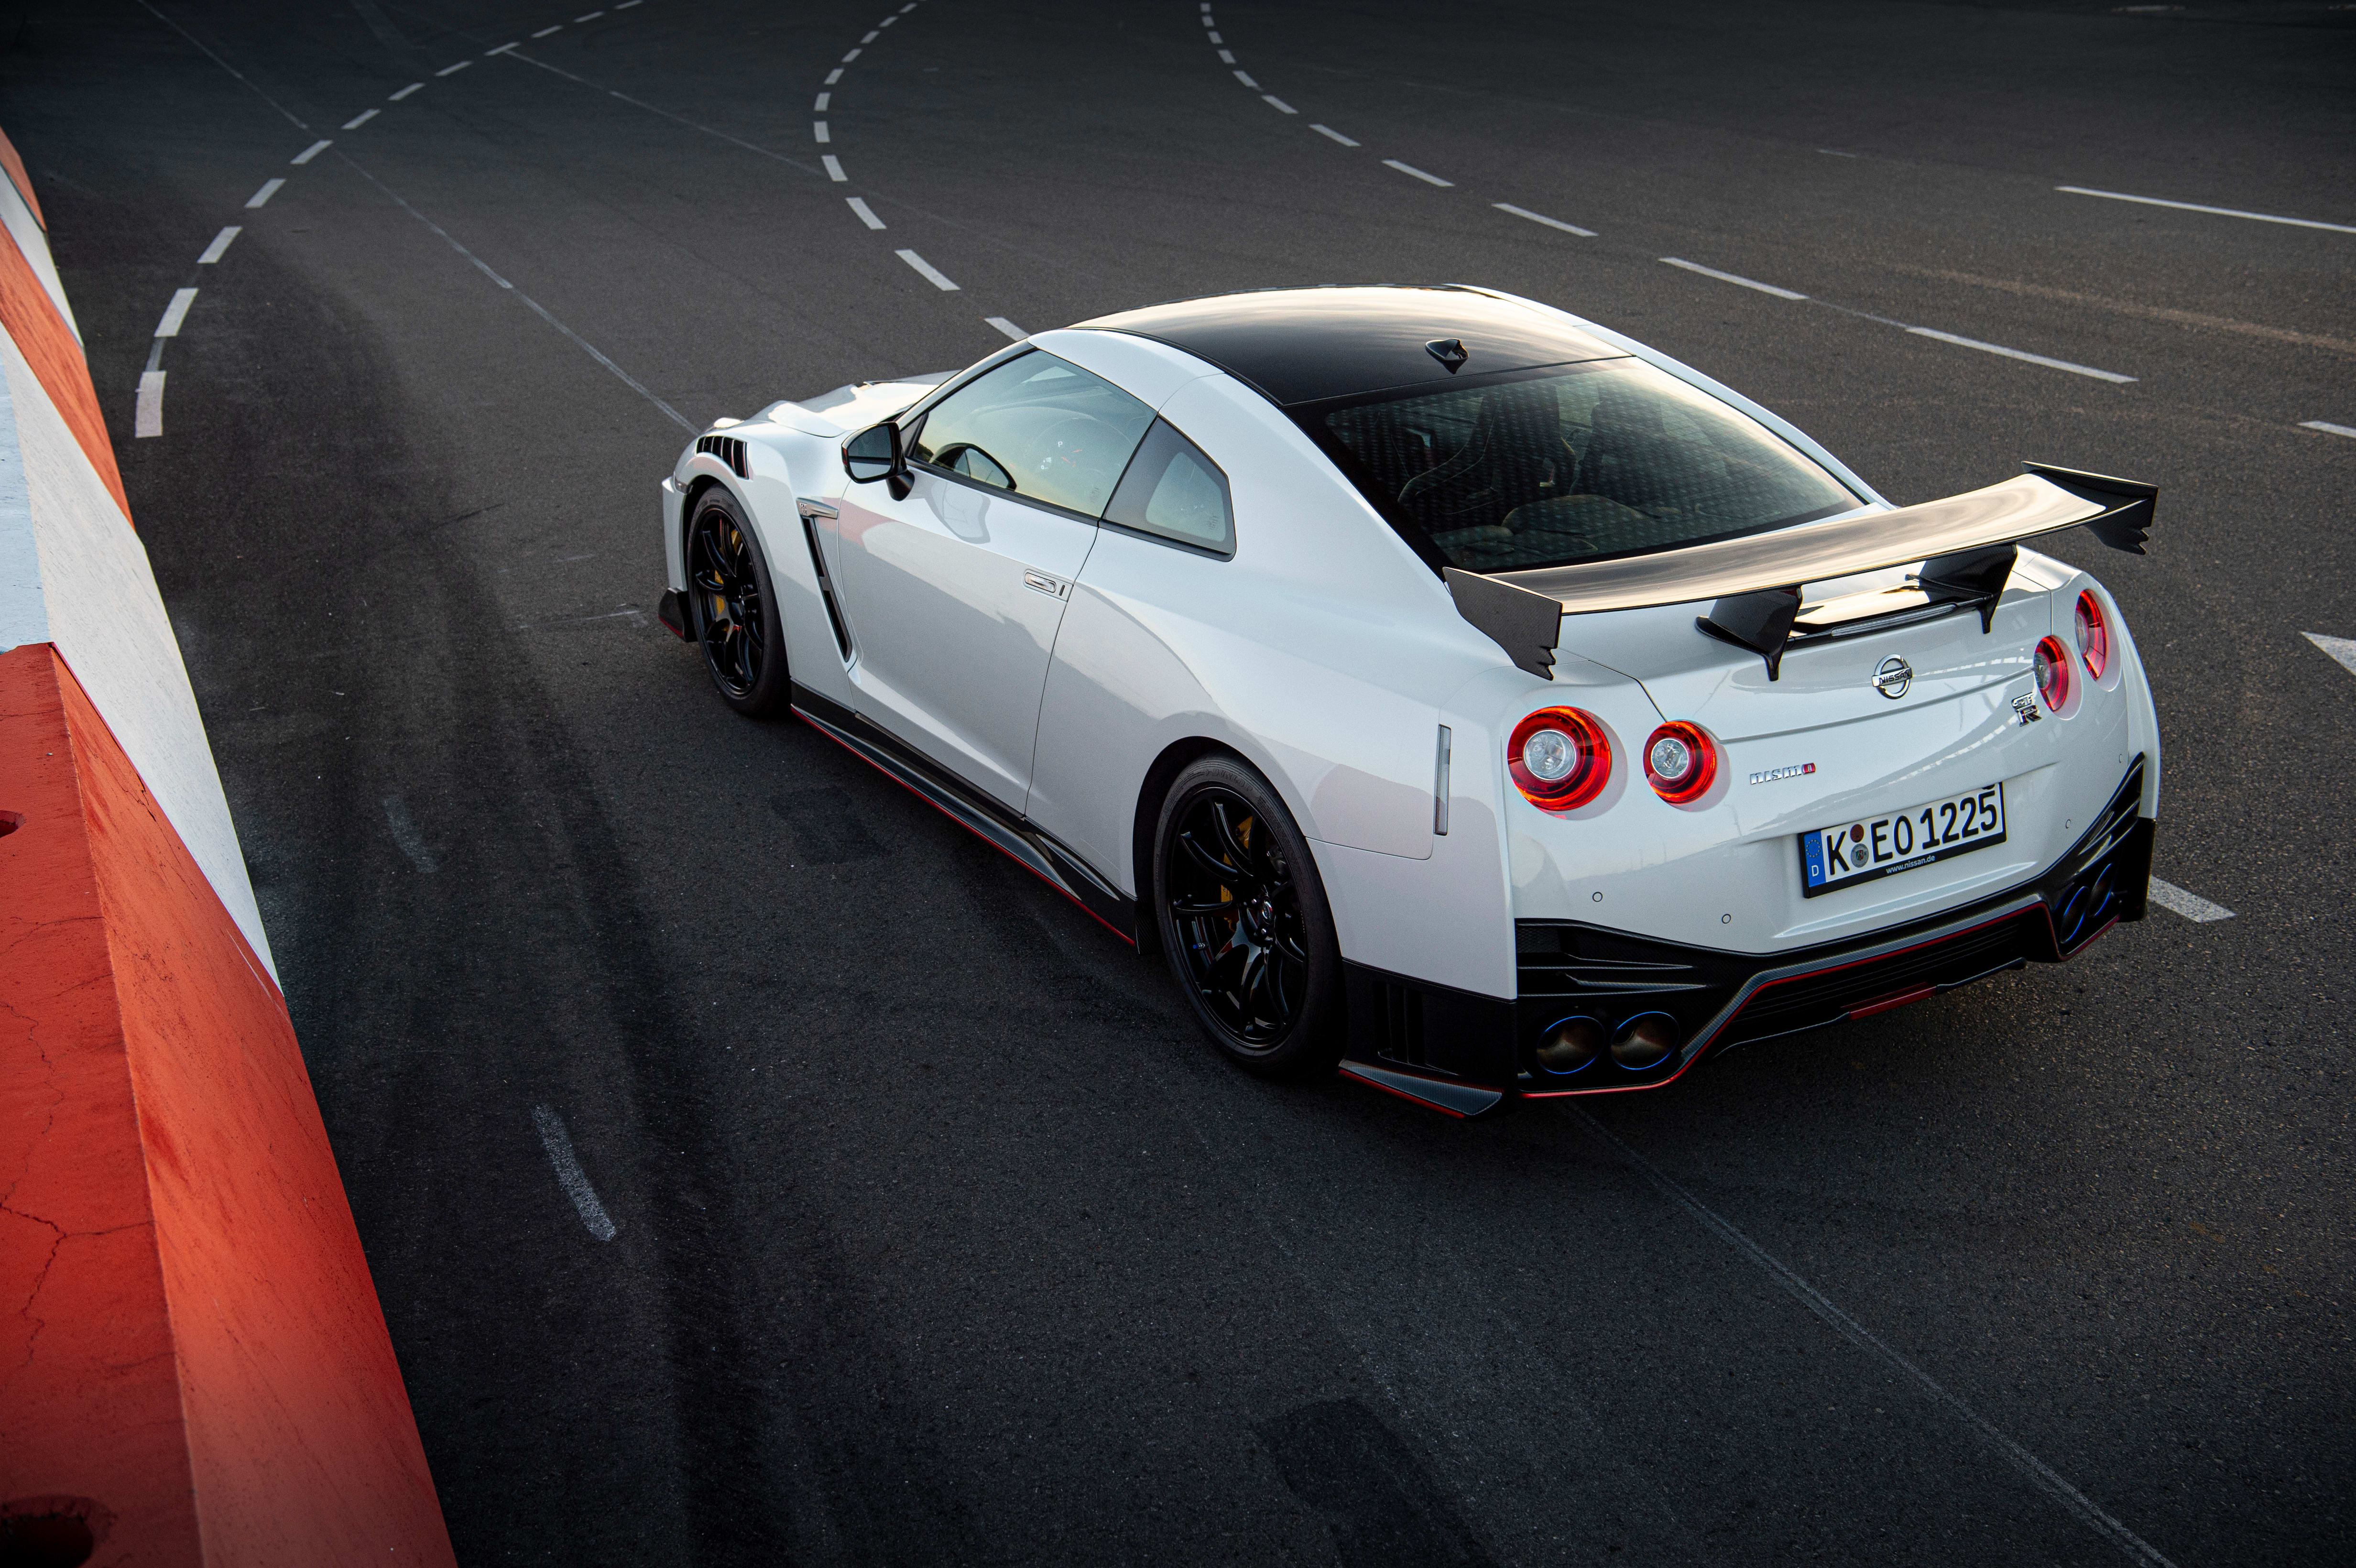 2020 Nissan GT-R Nismo pricing and specs - Drive